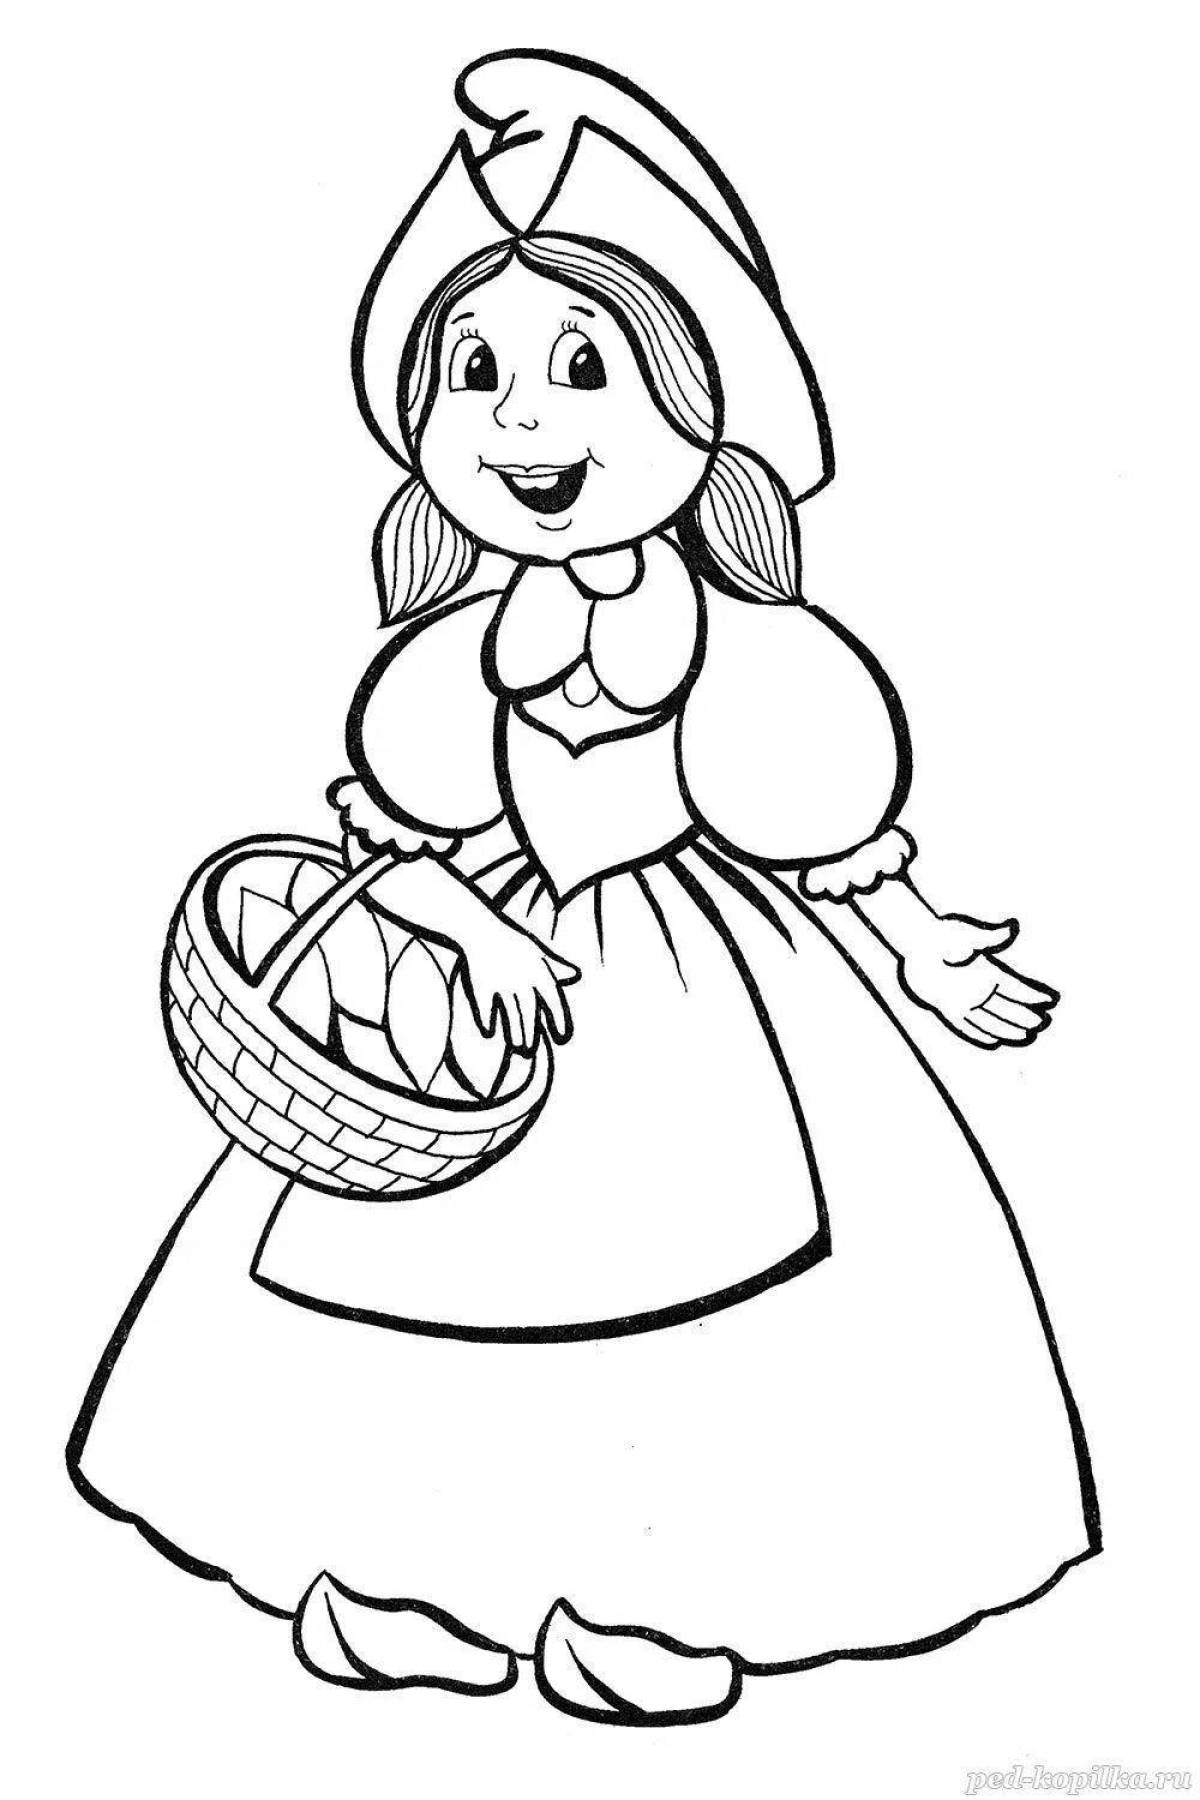 Charming Charles Perrault Little Red Riding Hood coloring book